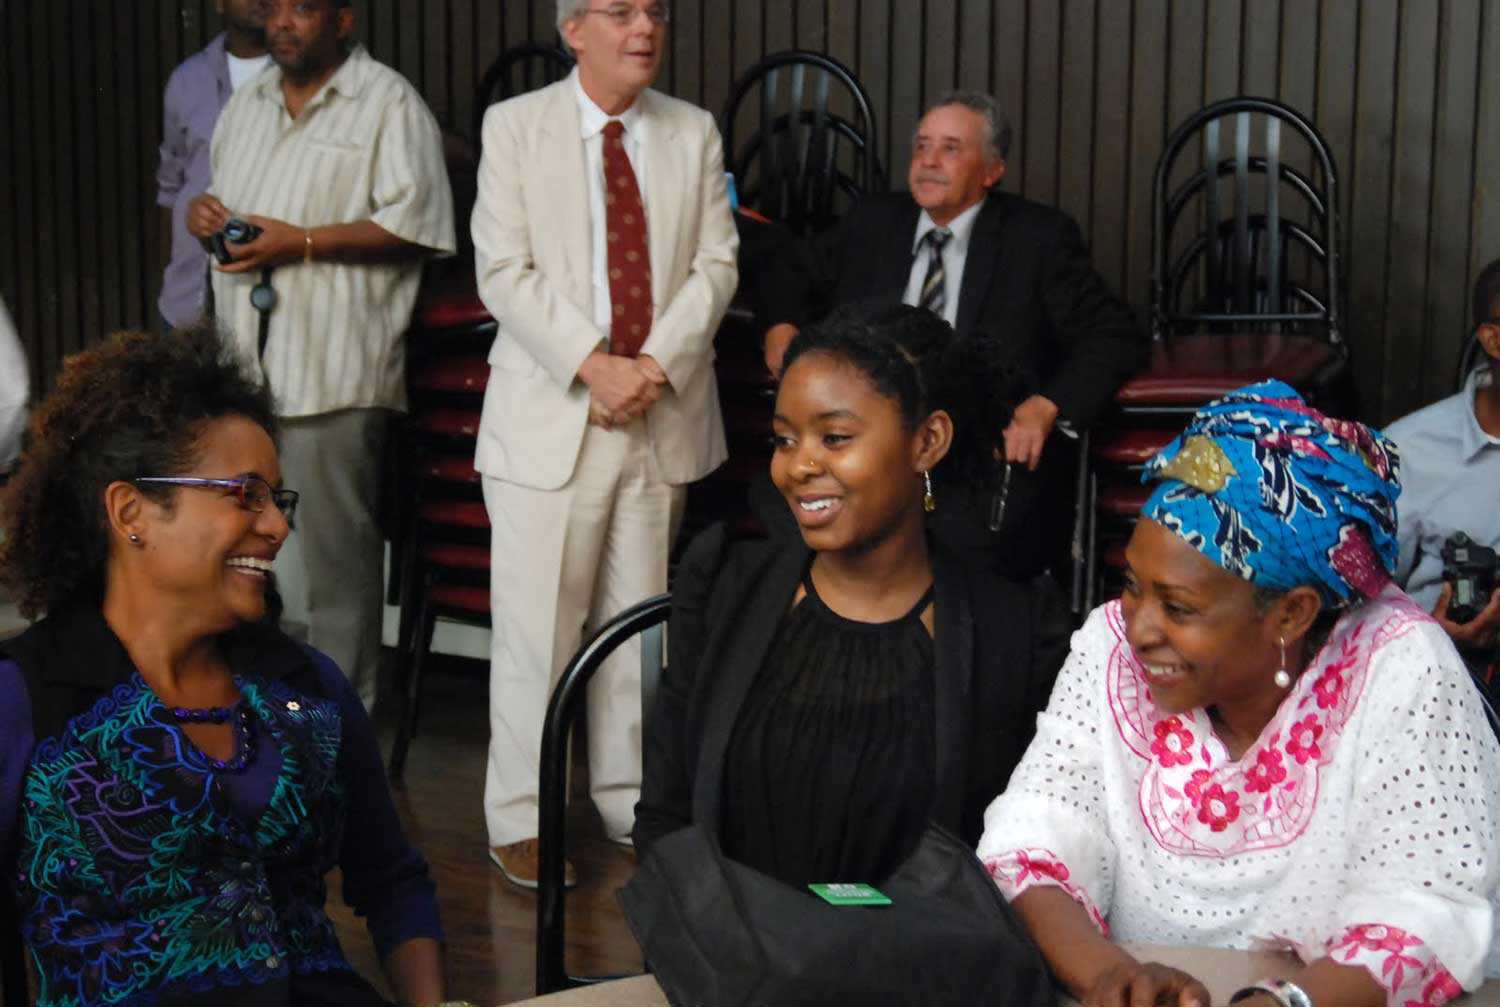 Former Governor General Michaëlle Jean shares a moment with Dr. Afua Cooper (right) and her daughter Habiba Diallo (centre) at the Harriet Tubman Institute event on August 27, 2011.